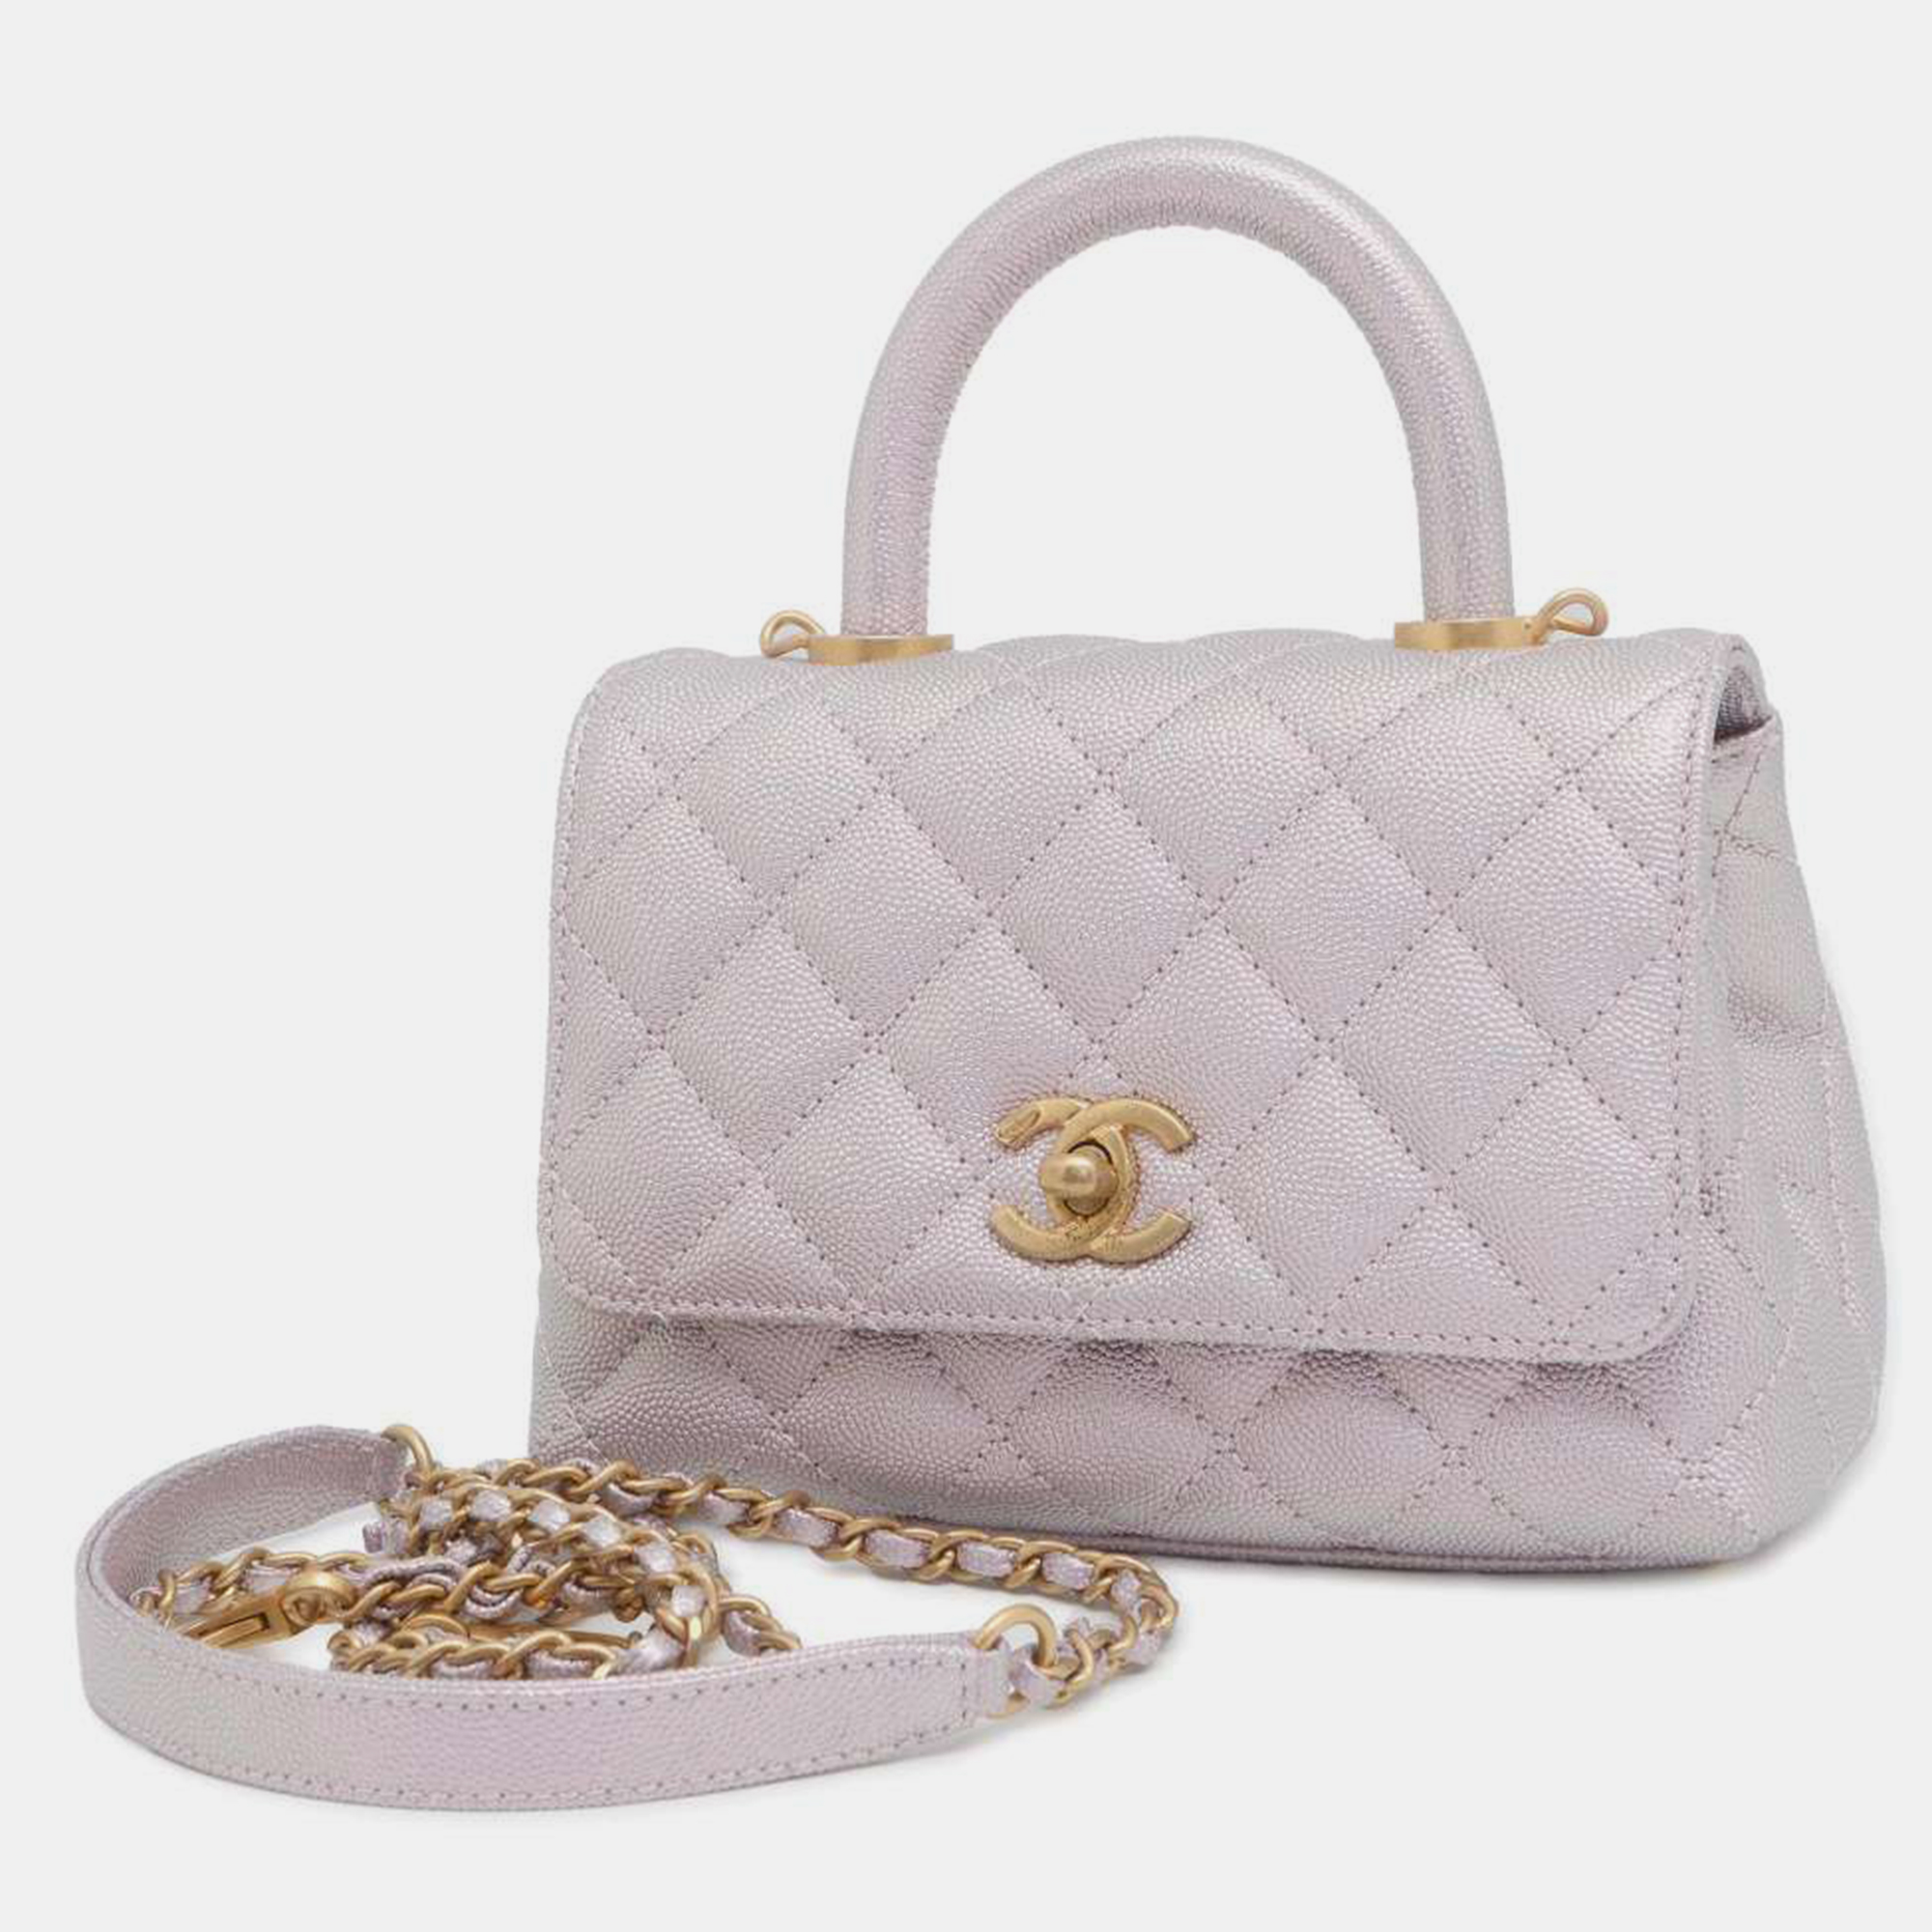 Chanel white caviar leather coco top handle bag